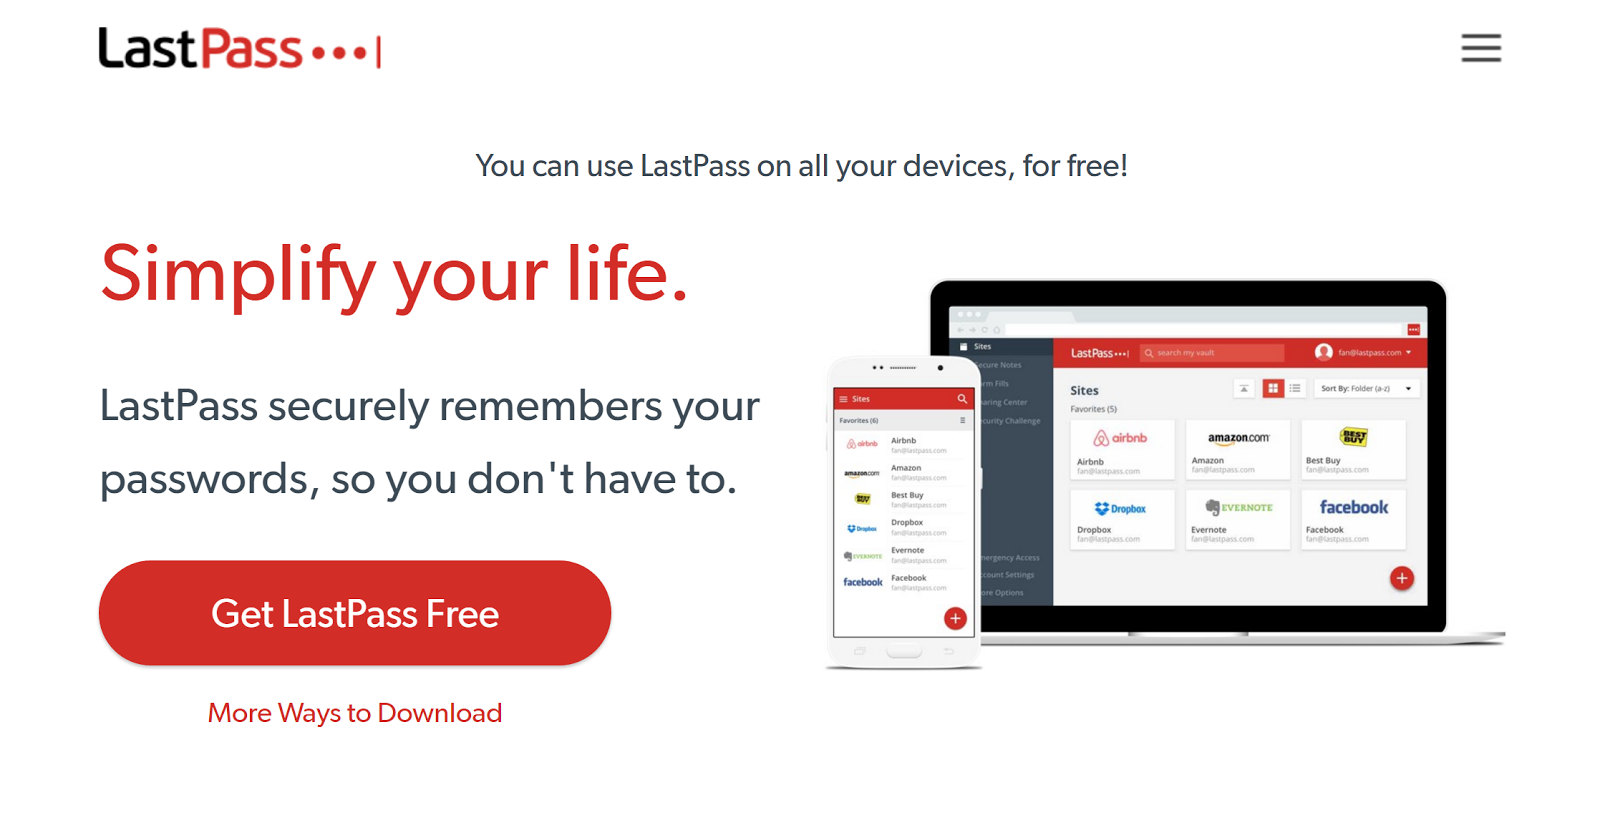 Work from anywhere apps -- LastPass for password management